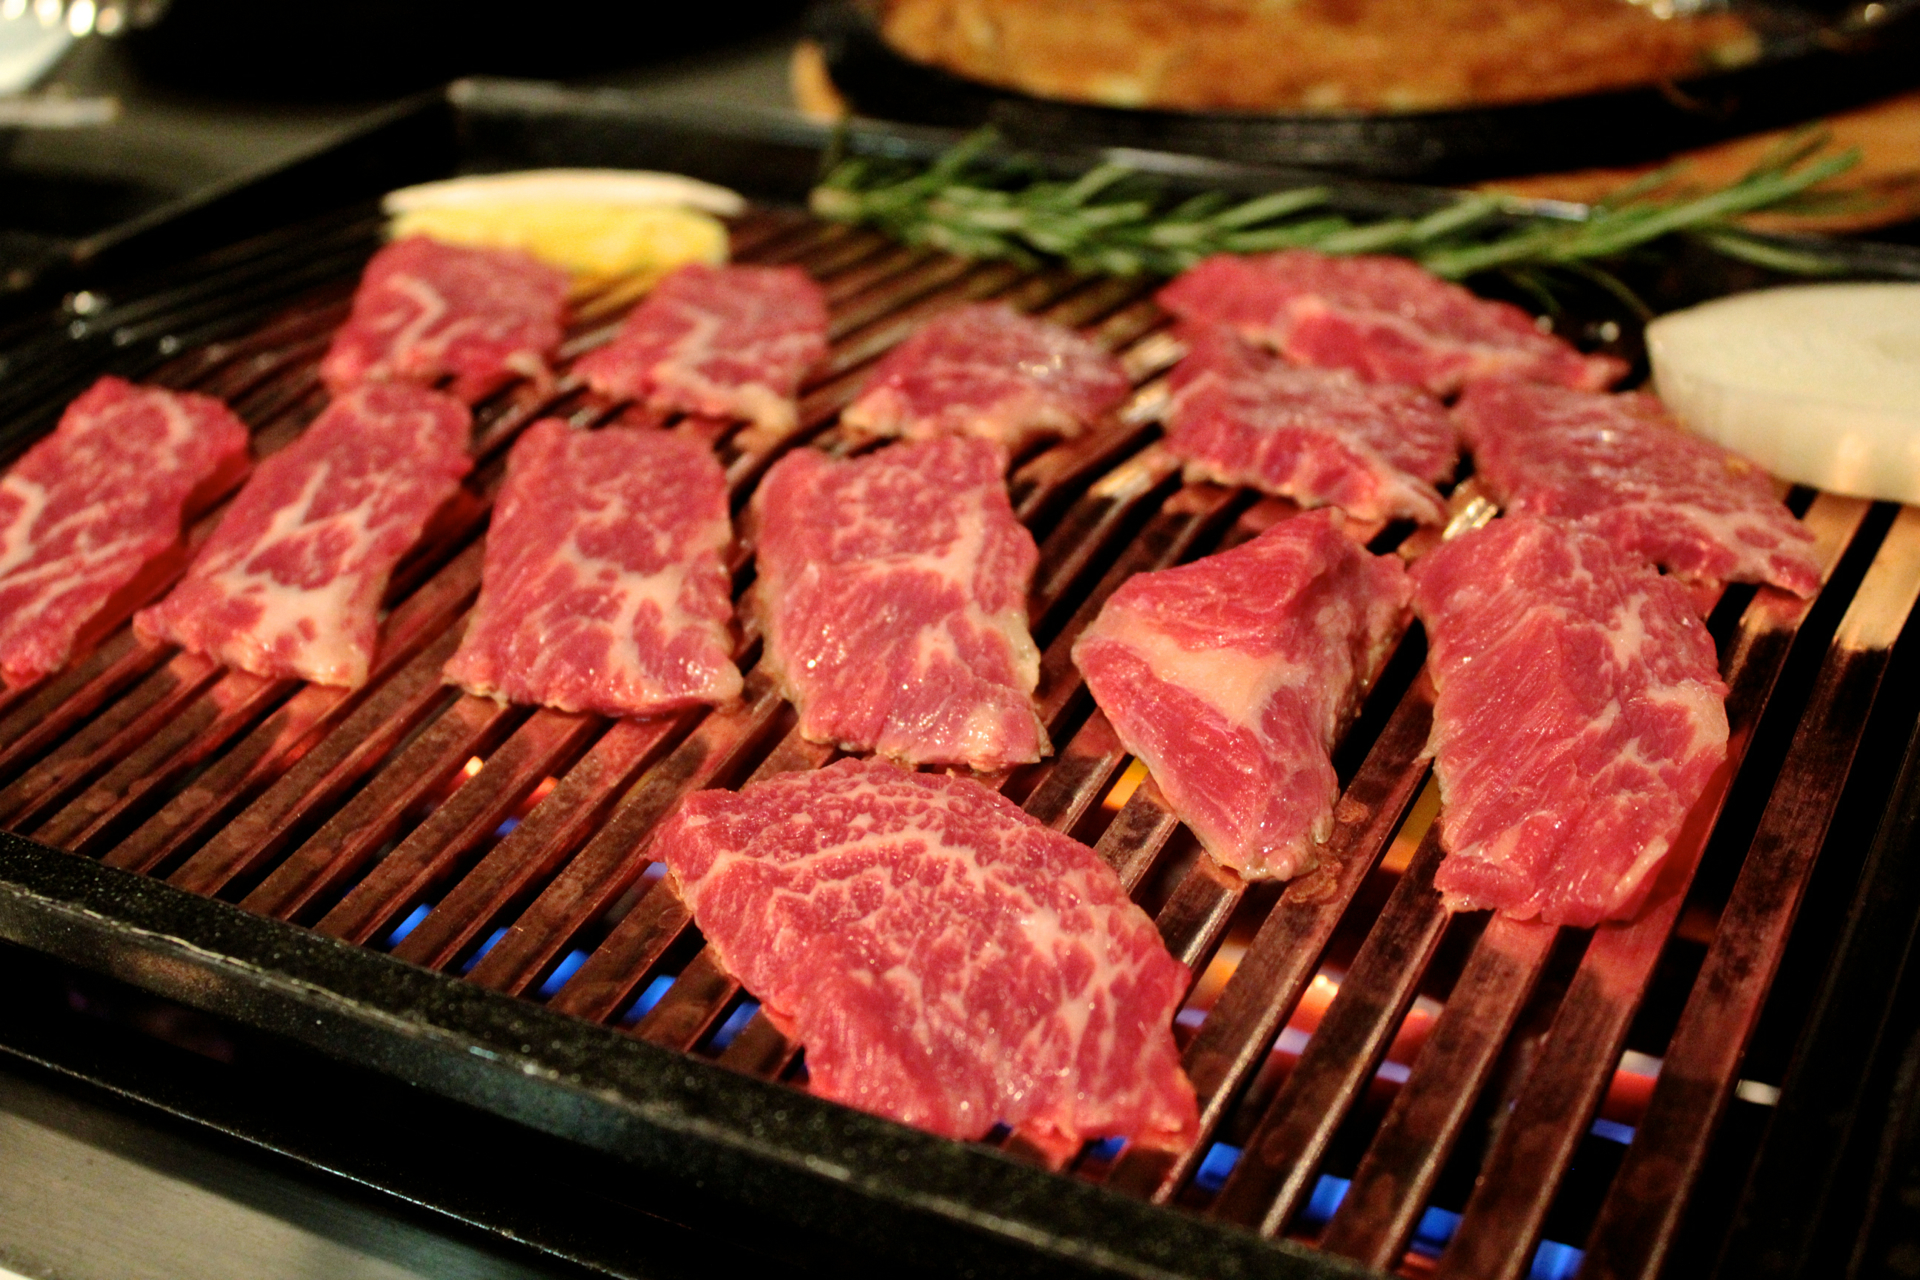 Slices of boneless short rib cooking on the grill at Chungdam.